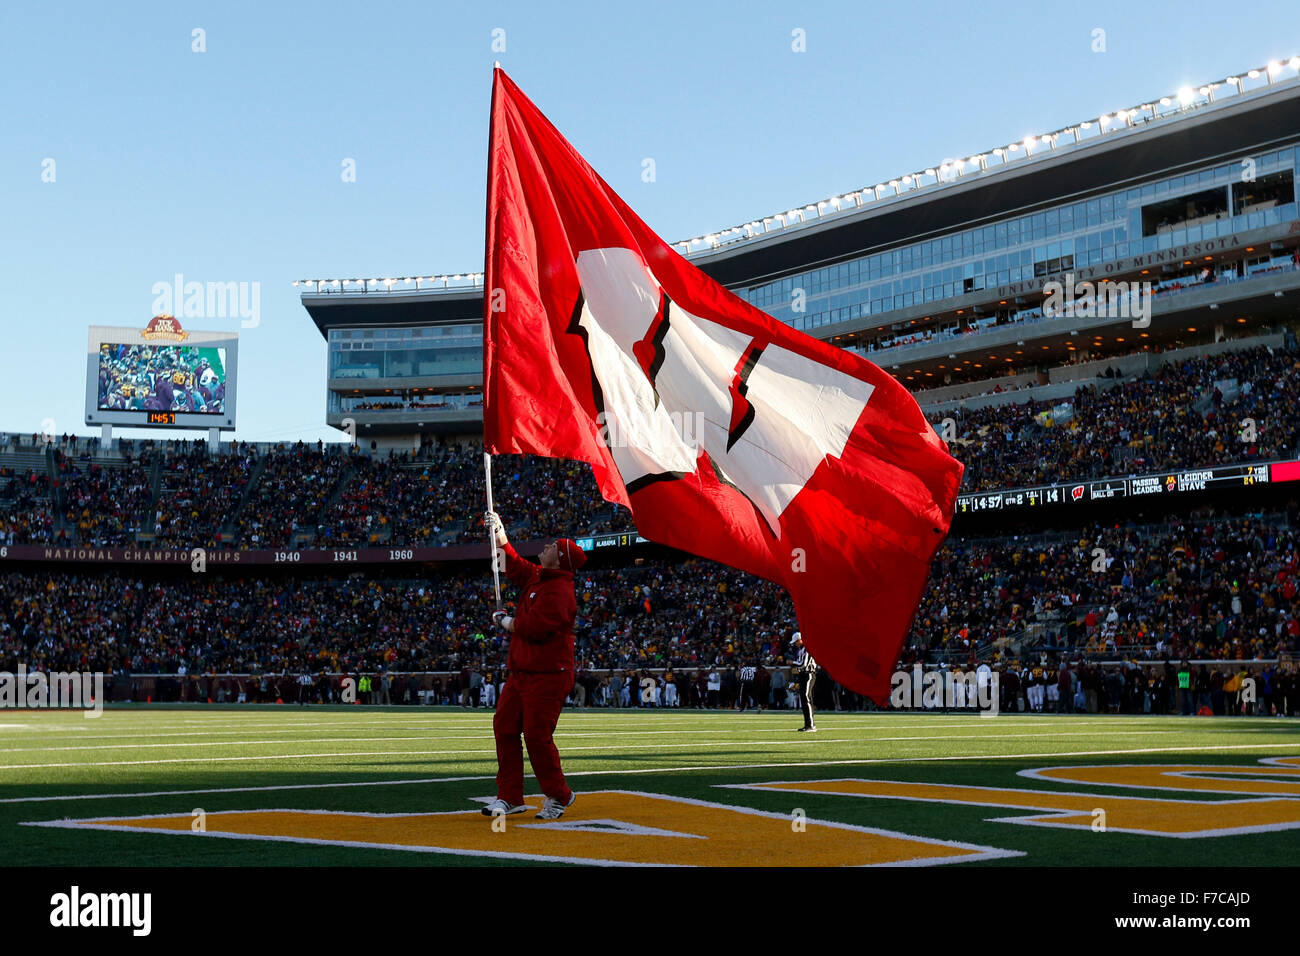 November 28, 2015: Wisconsin Badgers cheerleader waives the Wisconsin flag after a touchdown during the NCAA football game between the Wisconsin Badgers and the Minnesota Golden Gophers at TCF Bank Stadium in Minneapolis, MN Tim Warner/CSM. Stock Photo